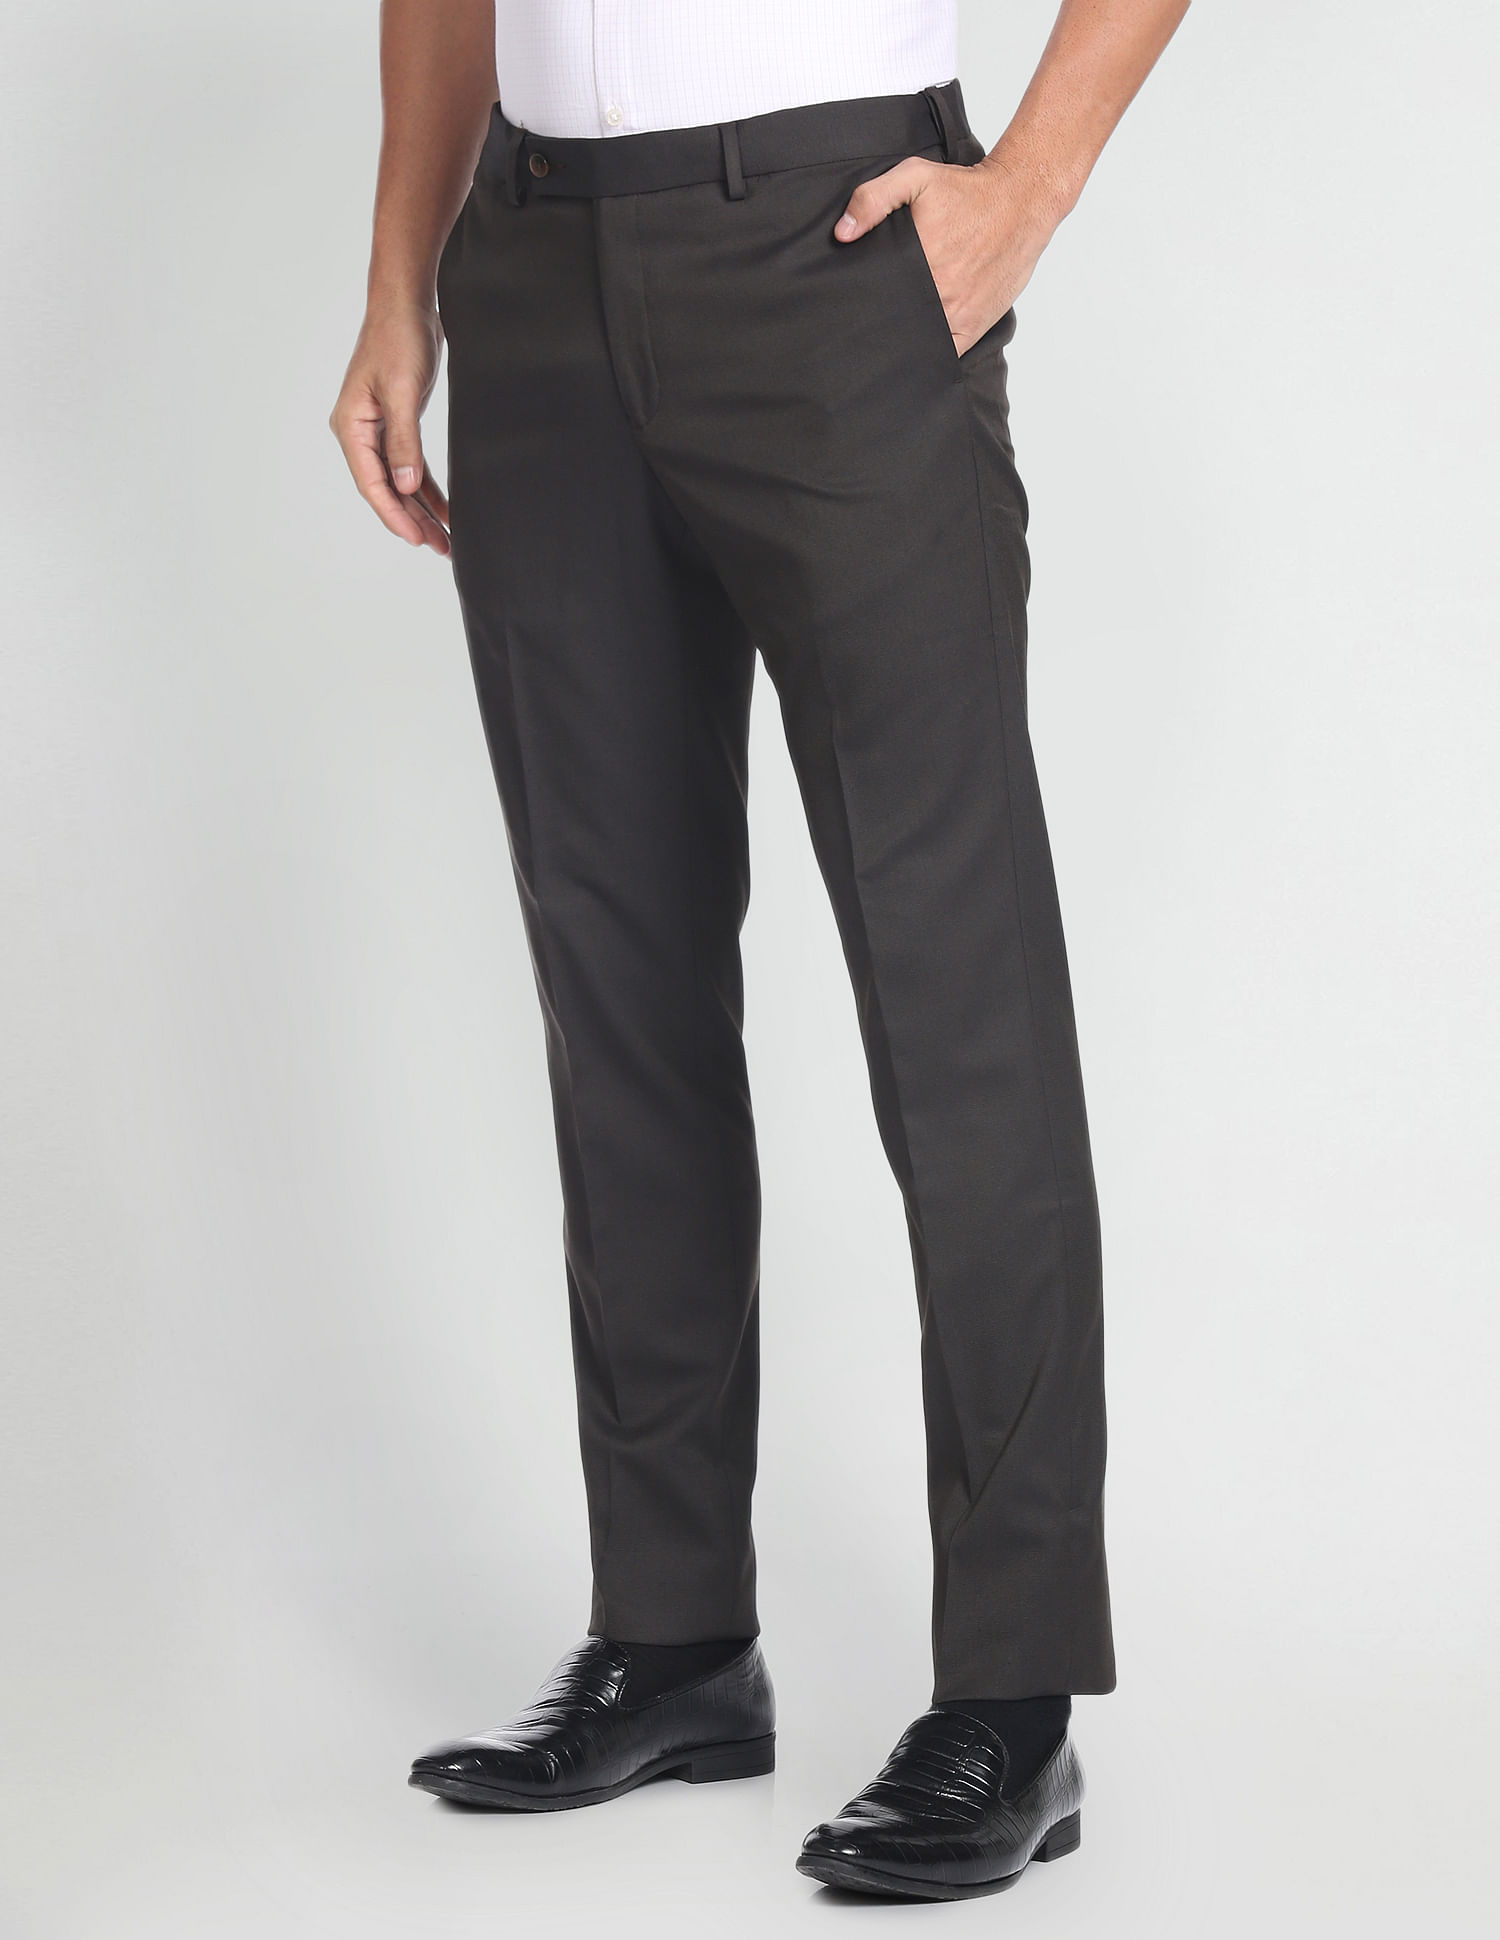 Details 83+ formal trousers with sneakers latest - in.cdgdbentre